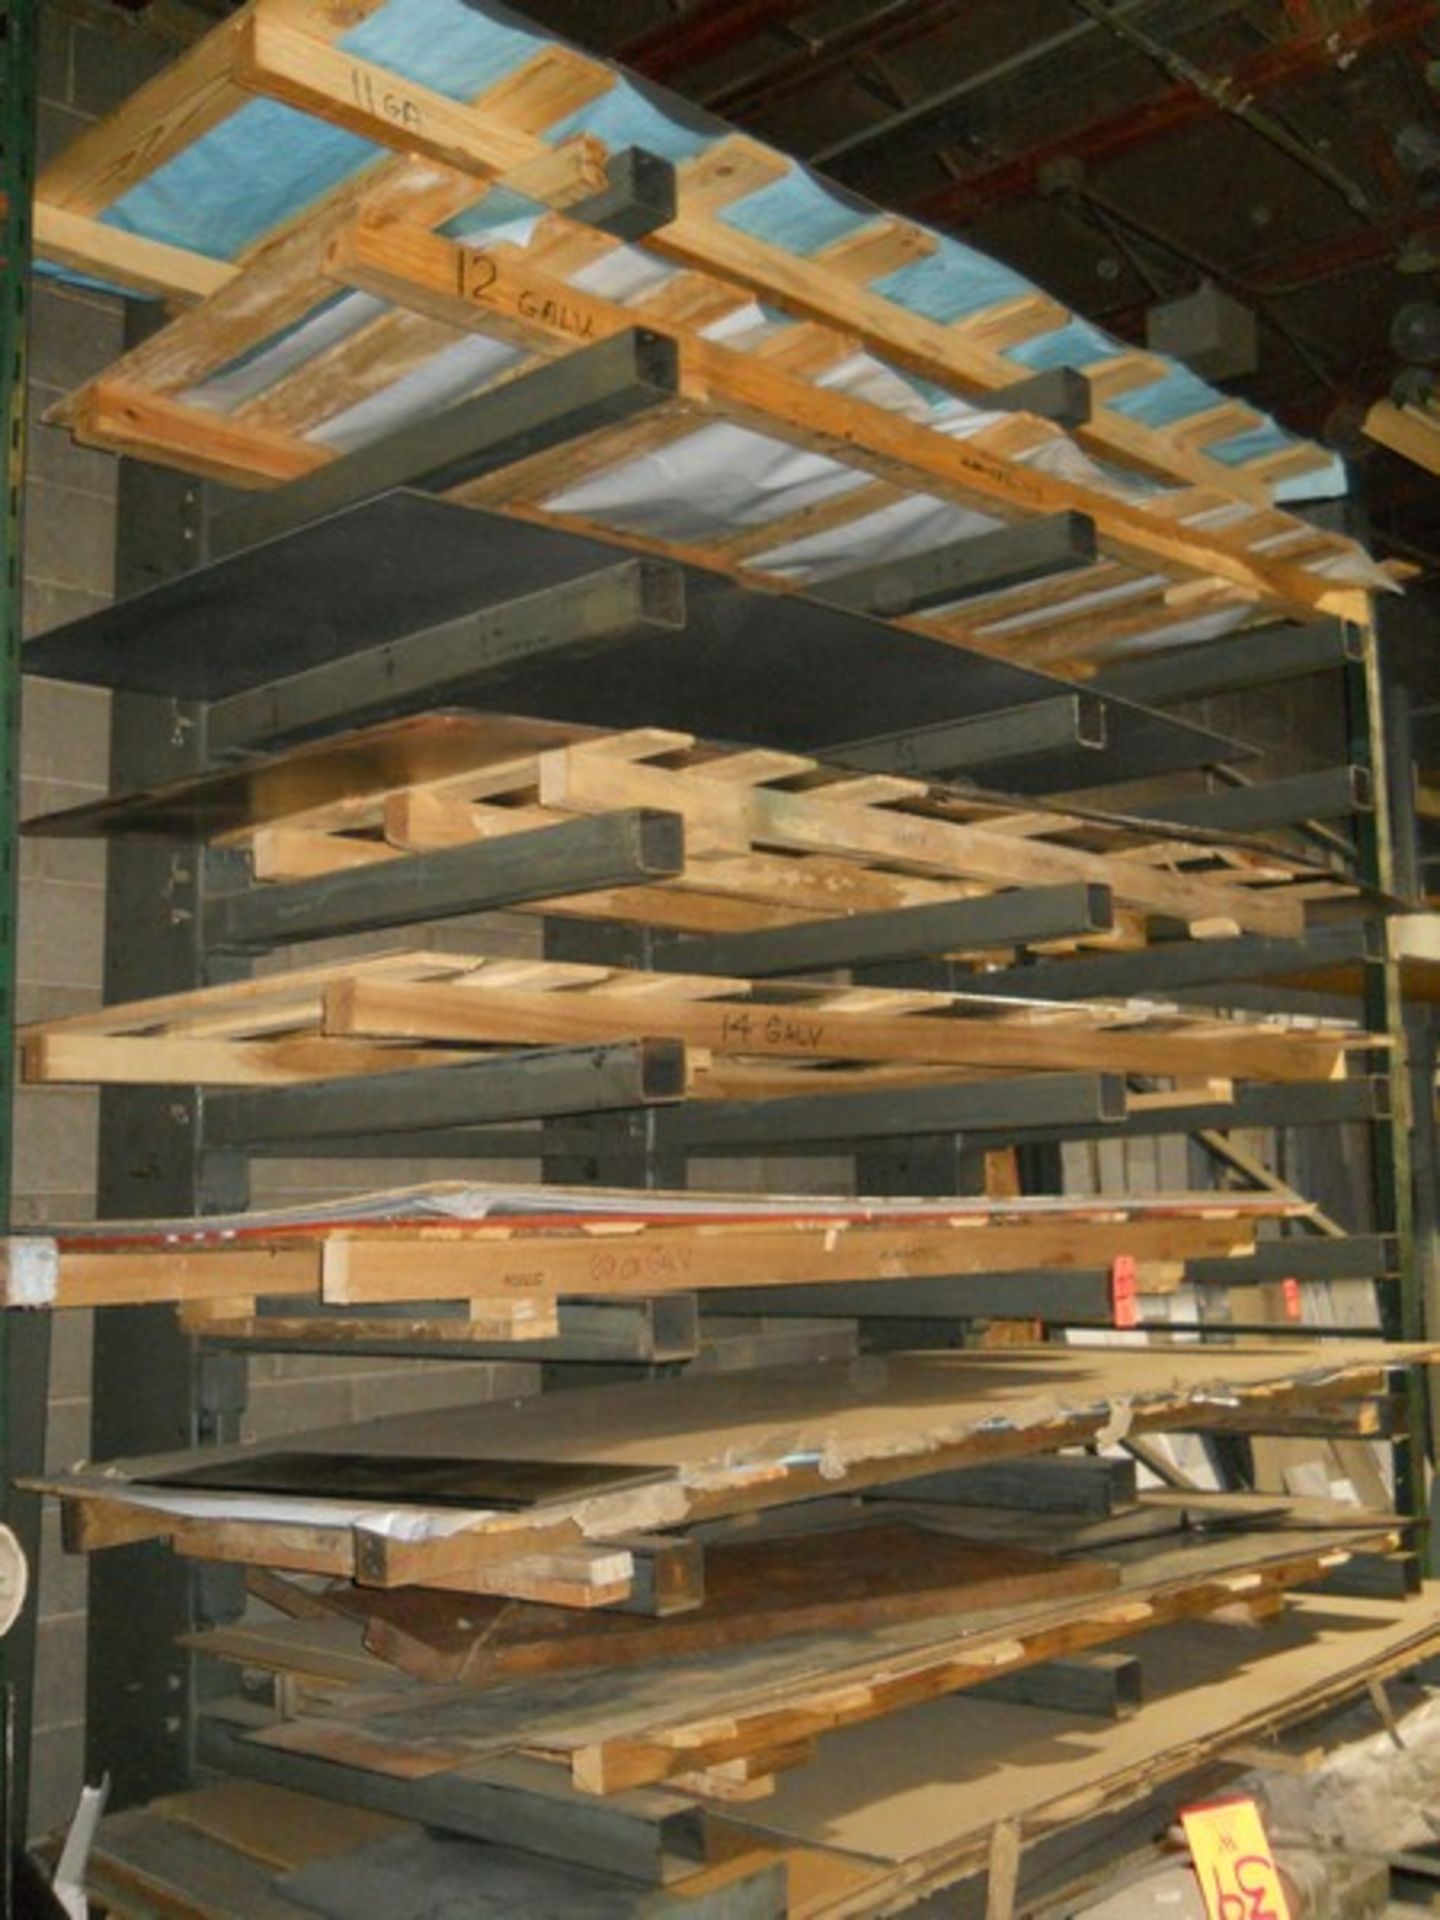 Section Cantilever Racking with Inventory Contents - Image 3 of 7